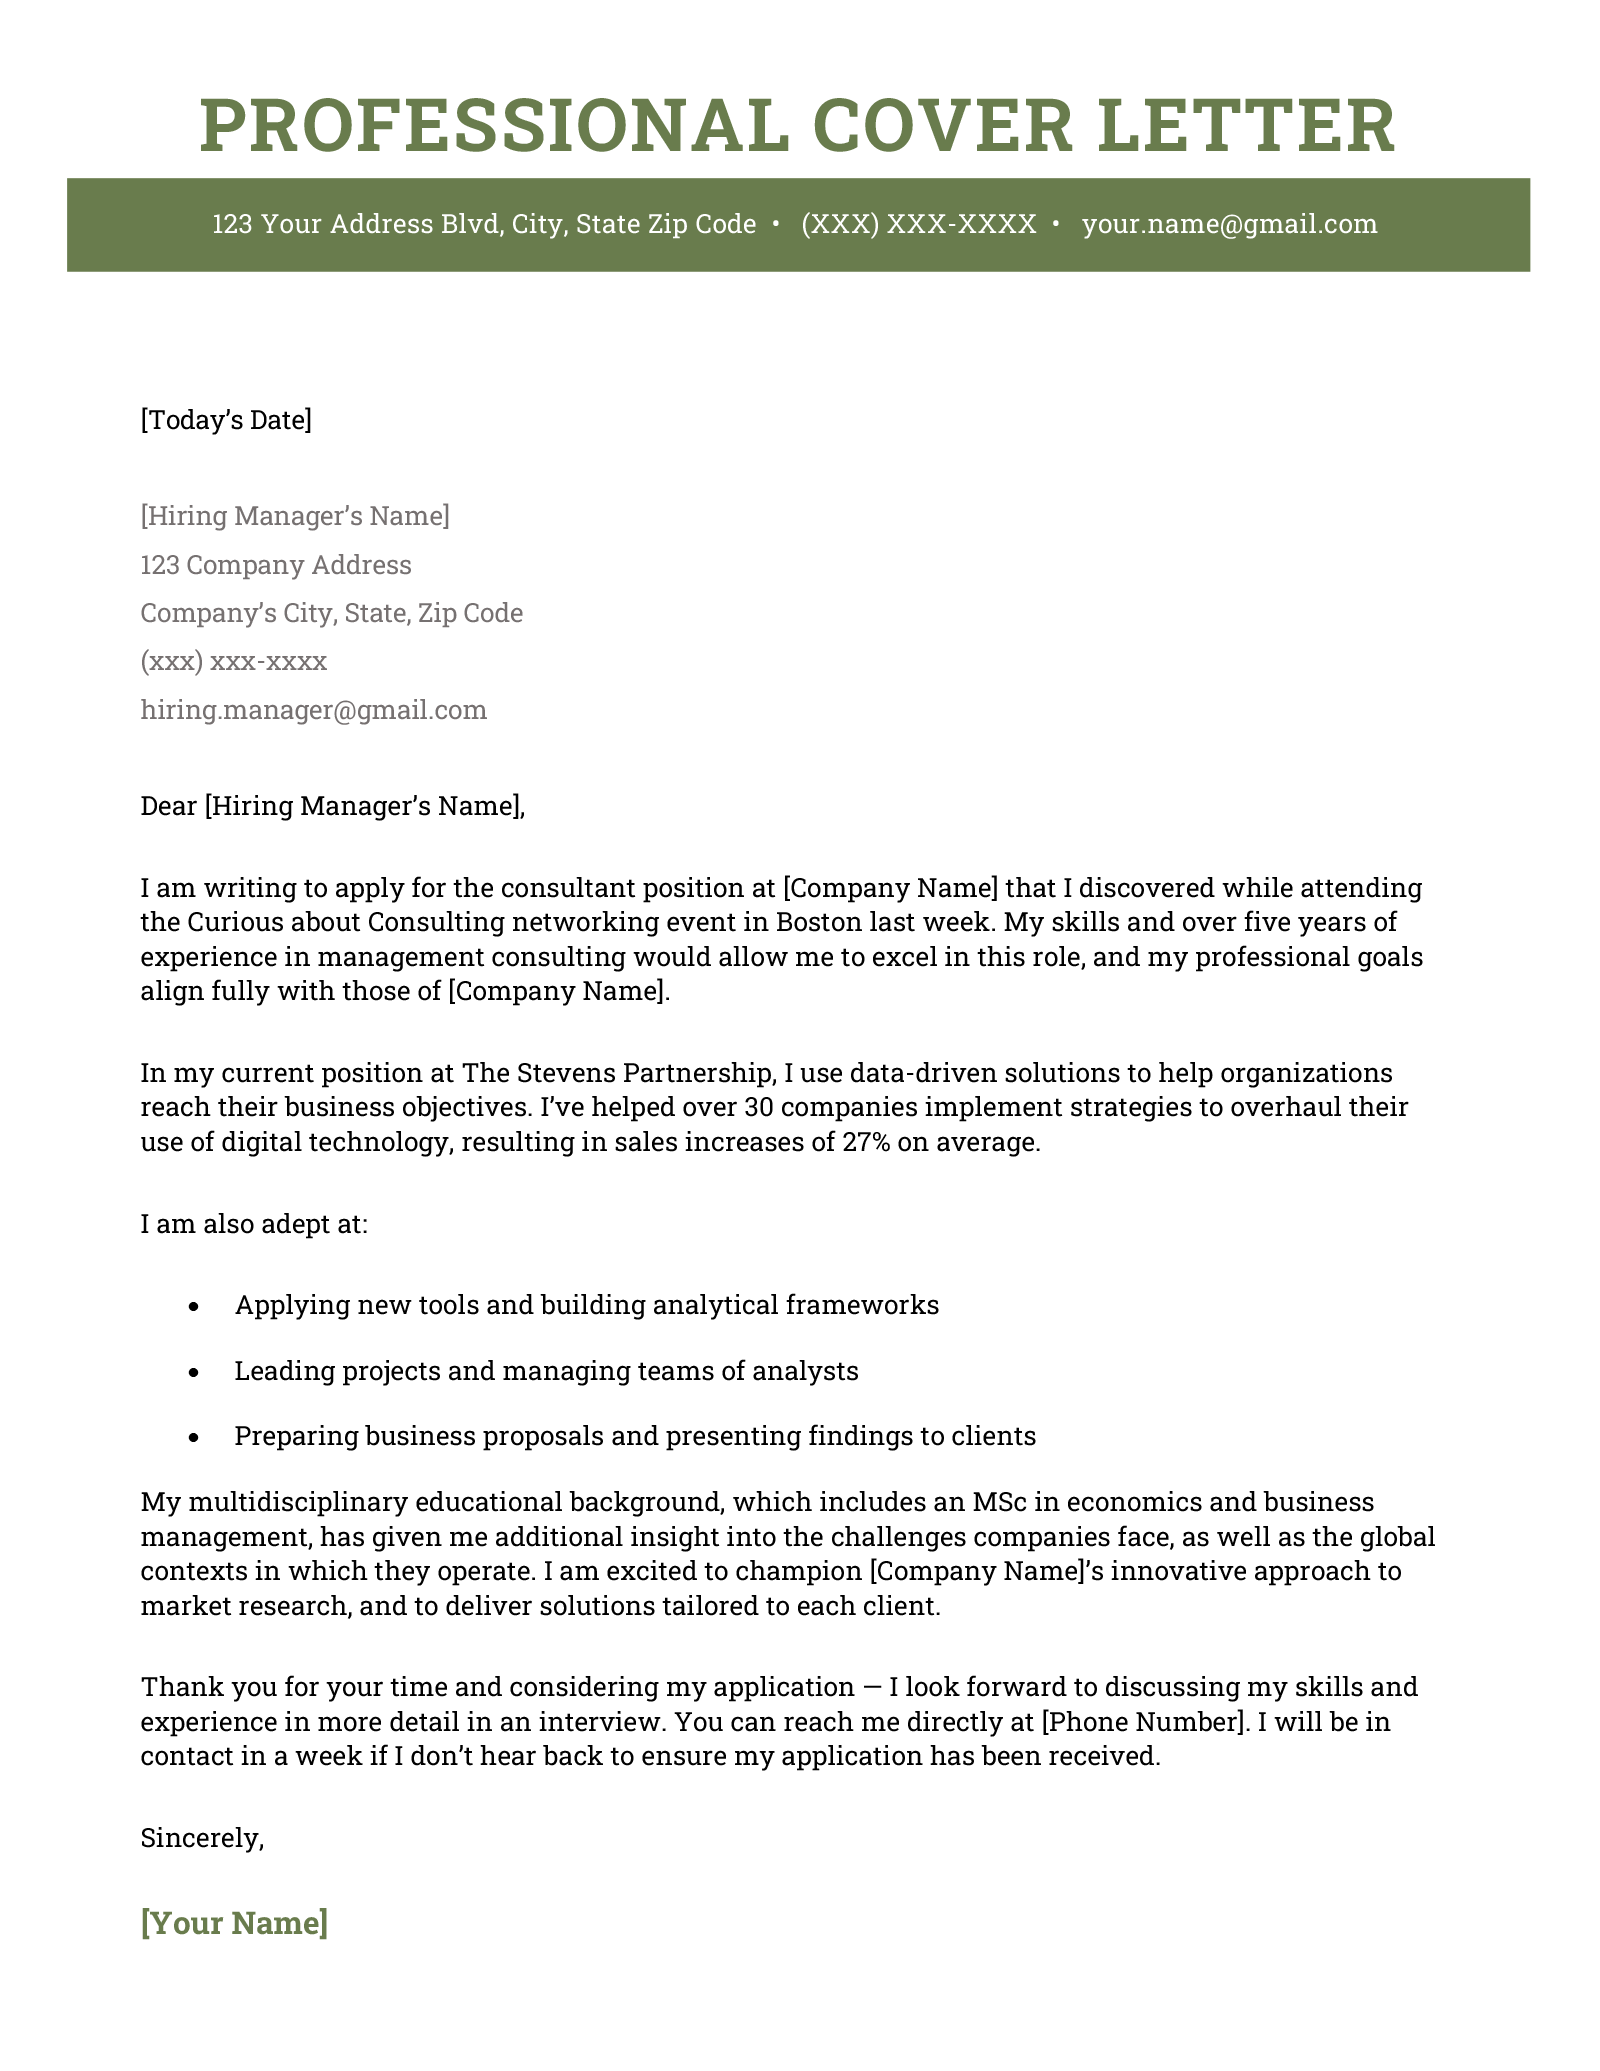 A resume with a green header following a professional cover letter format.